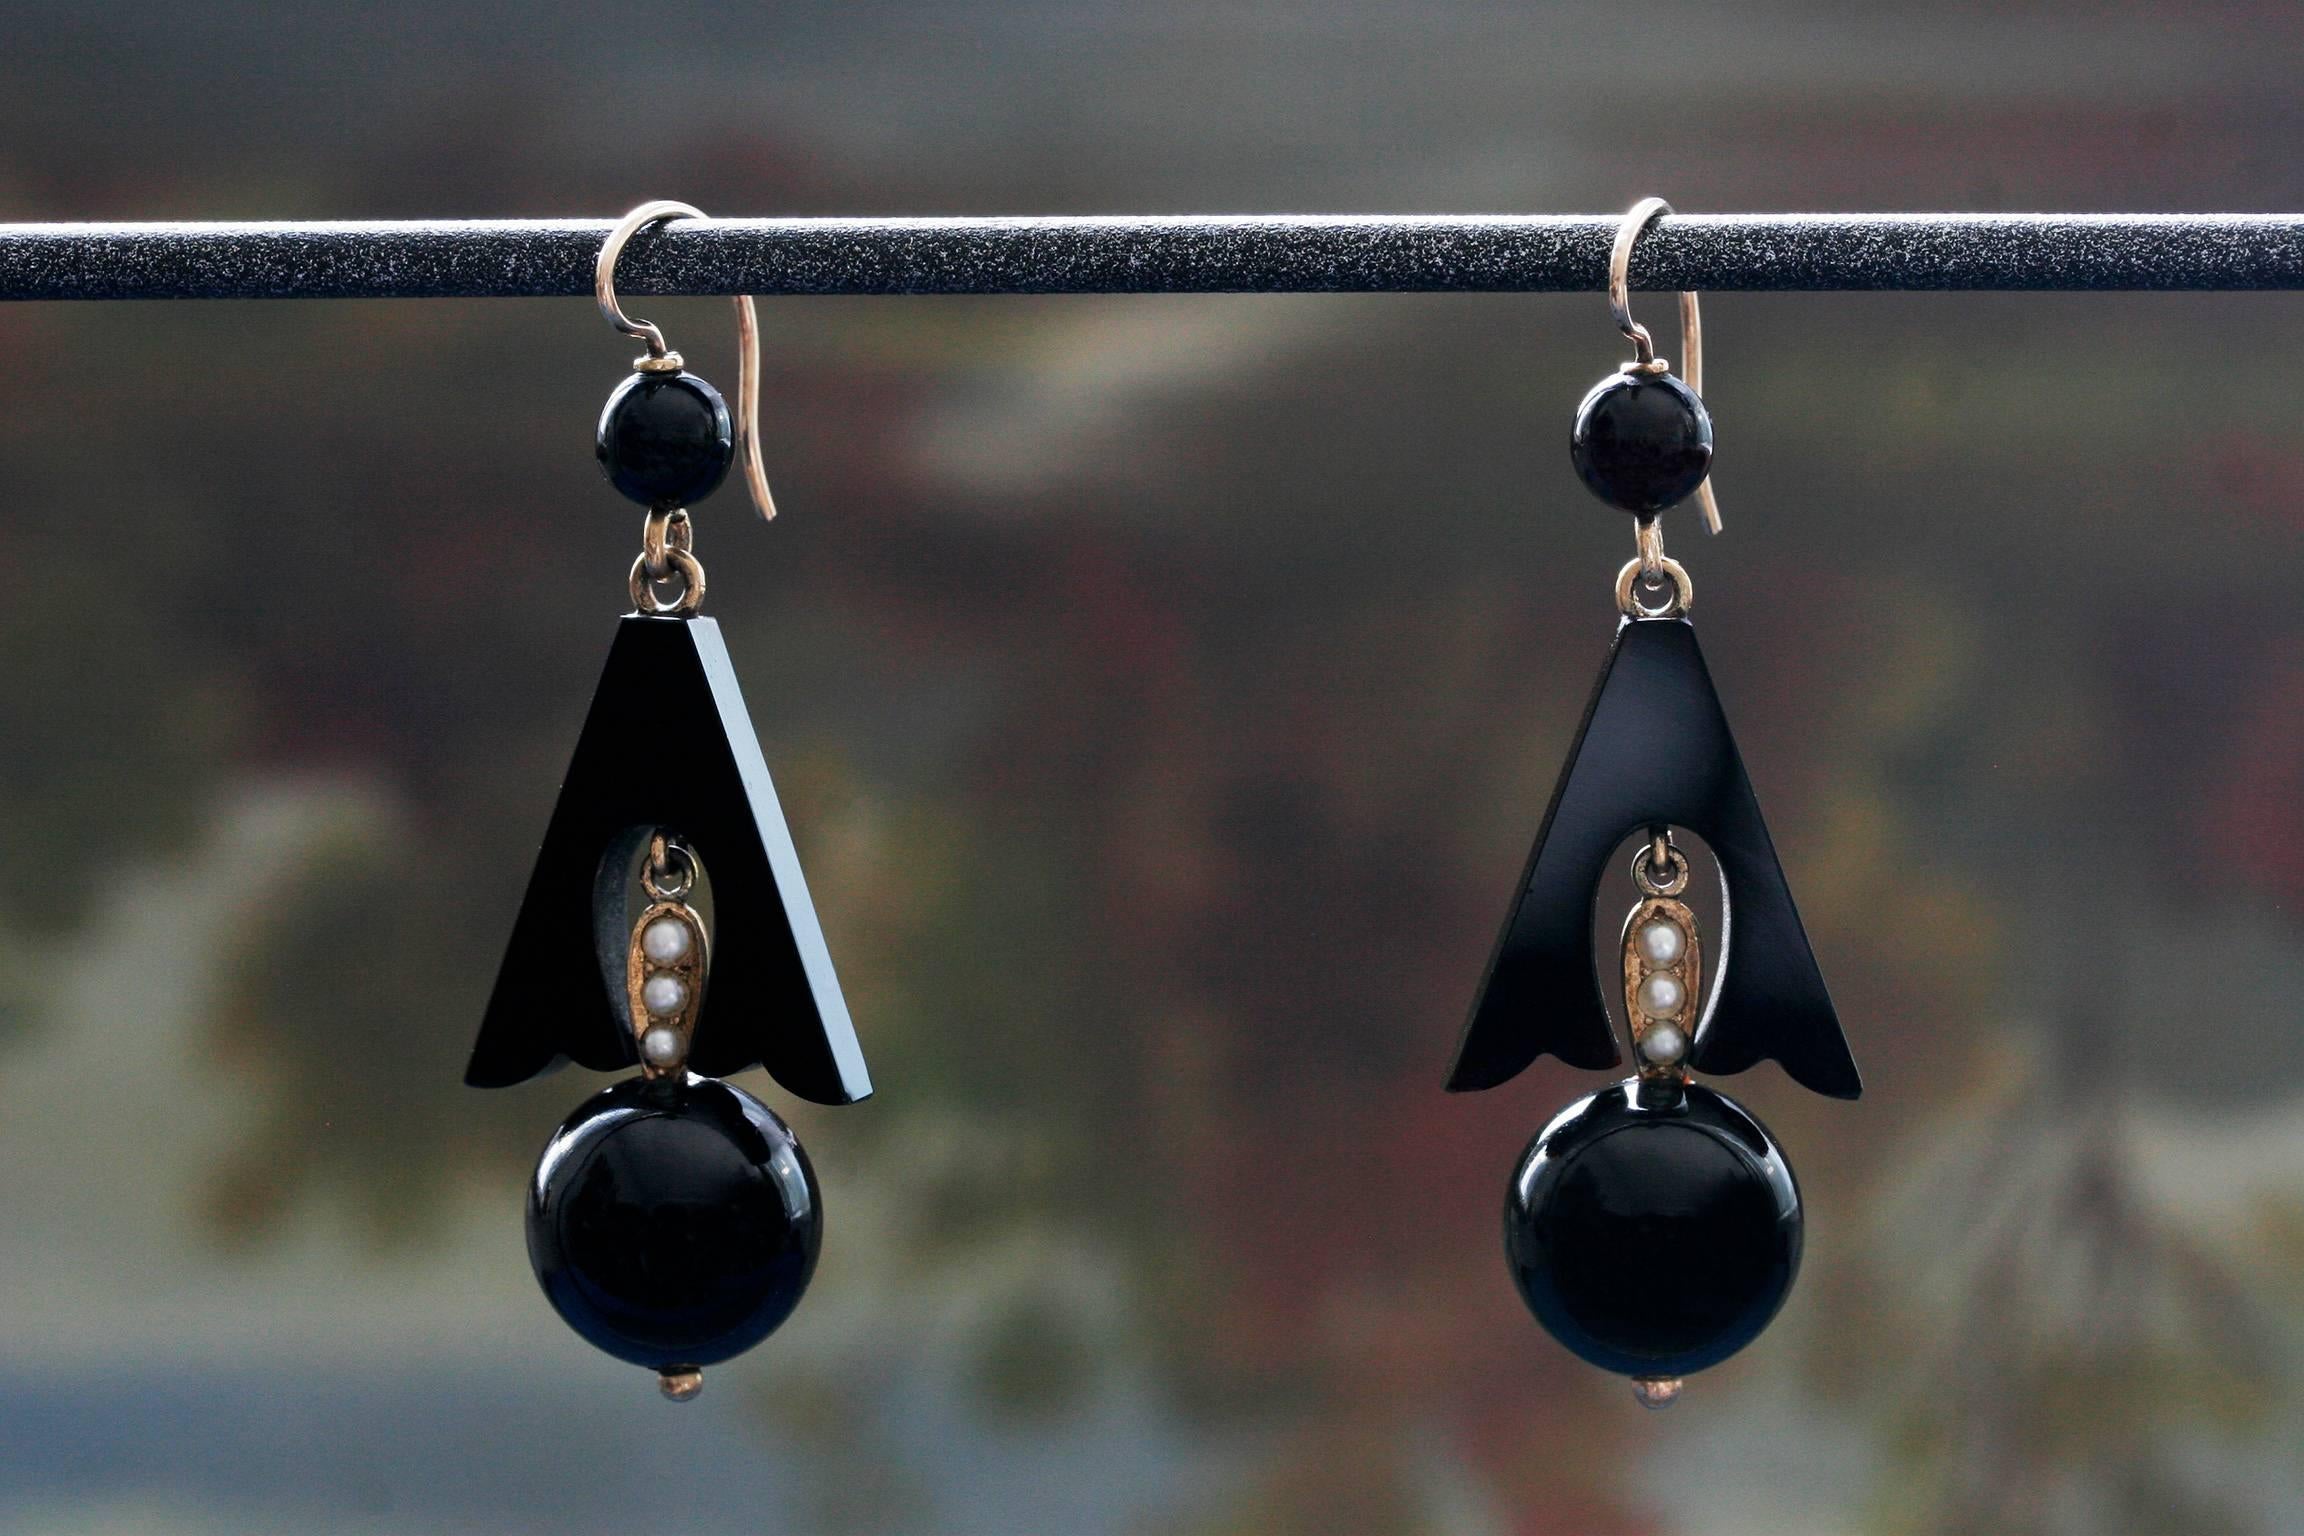 C.1880-1890.  A pair of Victorian onyx and seed pearl earrings. They measure approximately 1.5 inches, and have beautiful movement when worn. Set in 14k gold, and seed pearls are all intact. Overall in very good condition.